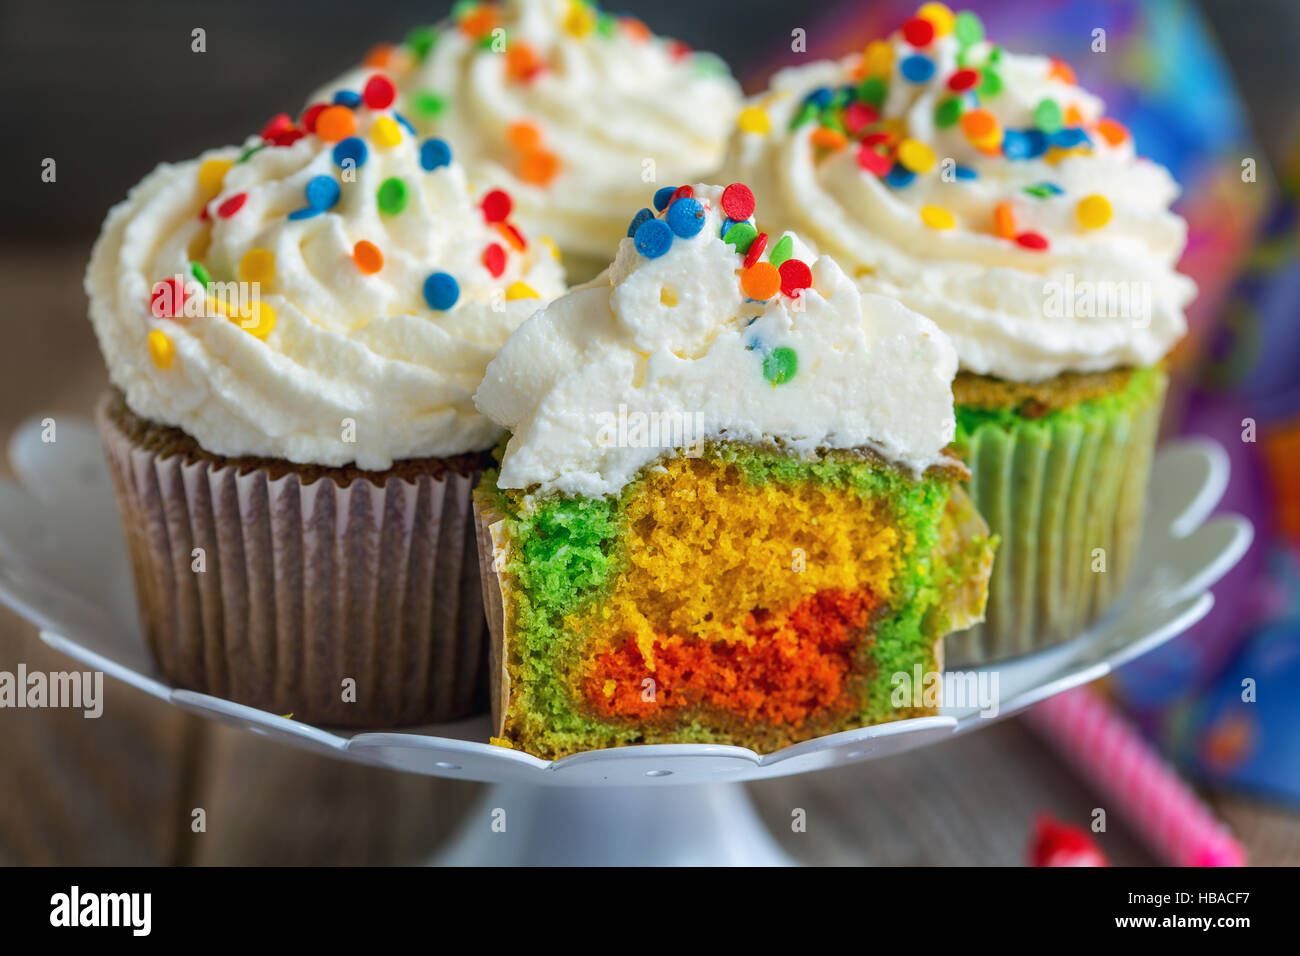 Funny cupcakes for the holiday. Stock Photo